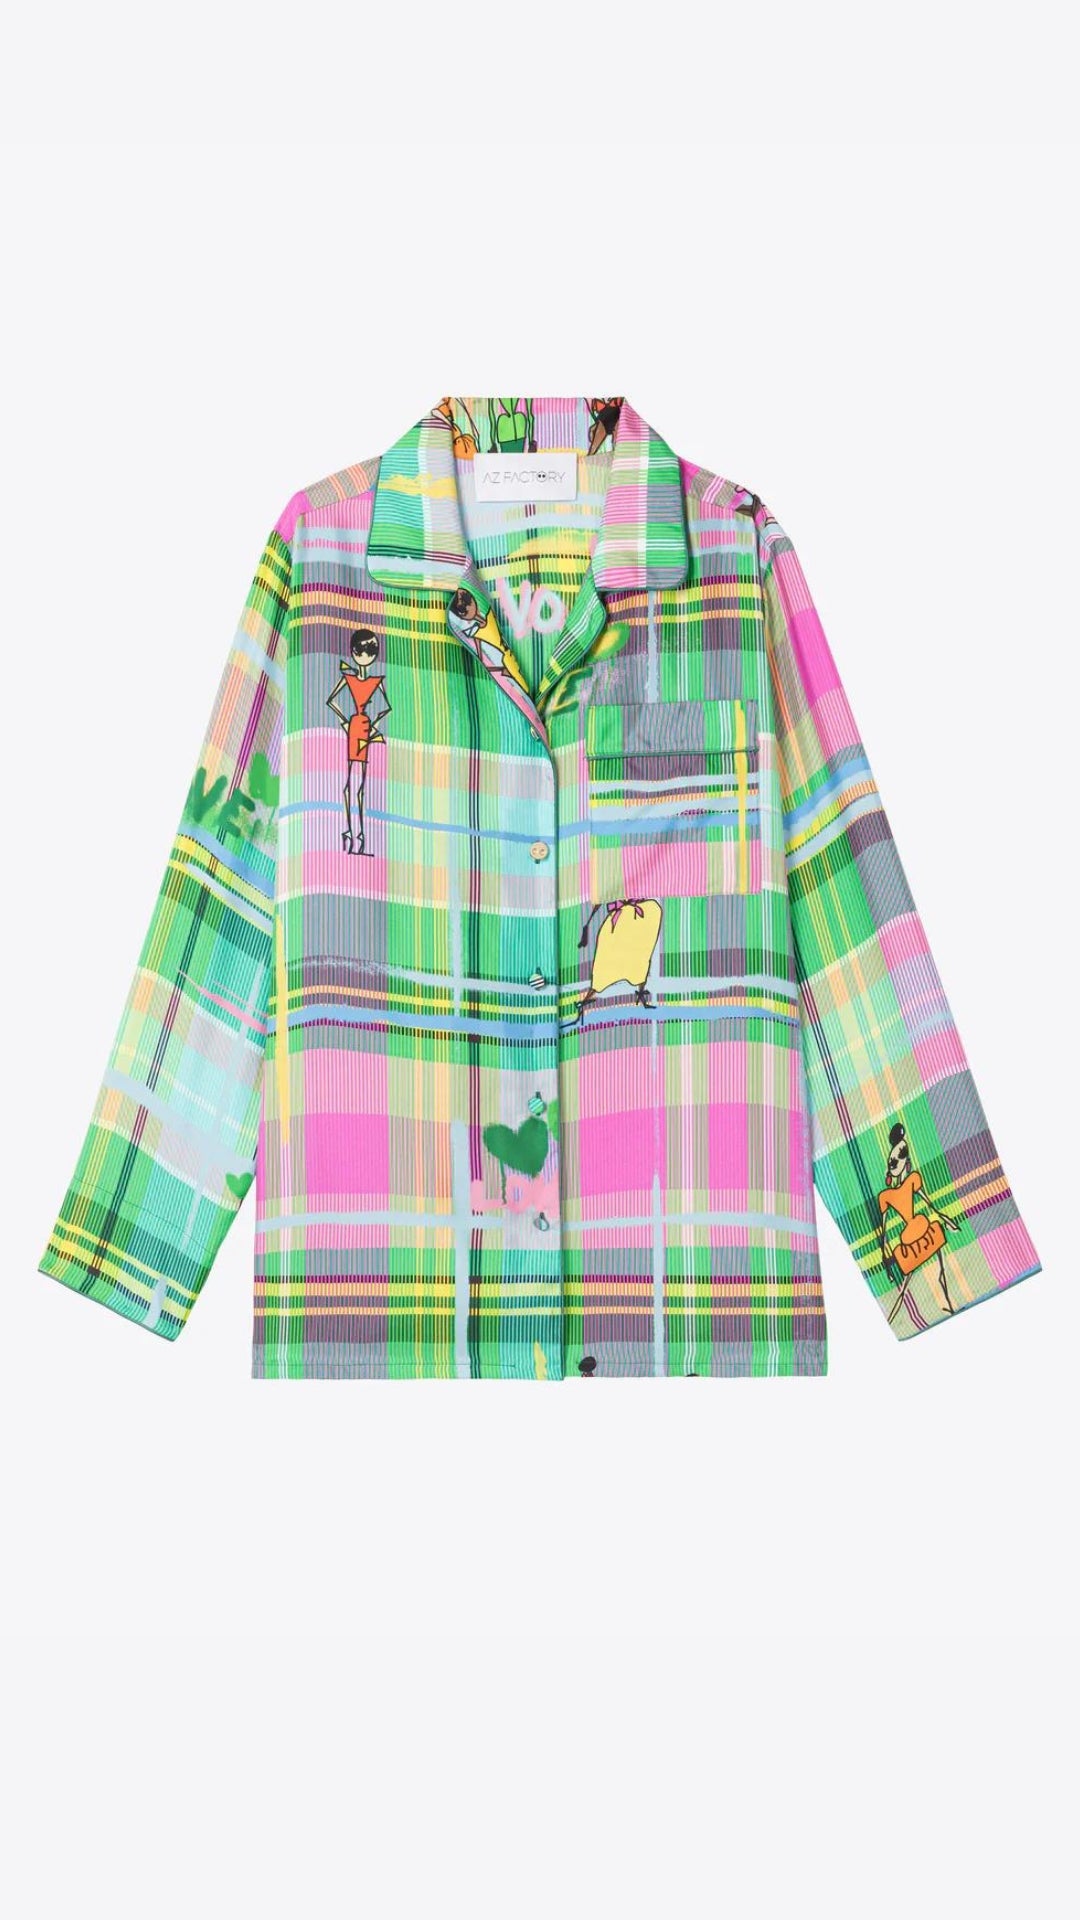 AZ Factory Chromatic Love Silk Blouse. Oversize silk blouse in multi color plaid with Alber Elbaz sketches on top. Button up front with rounded collar. Product photo facing front.